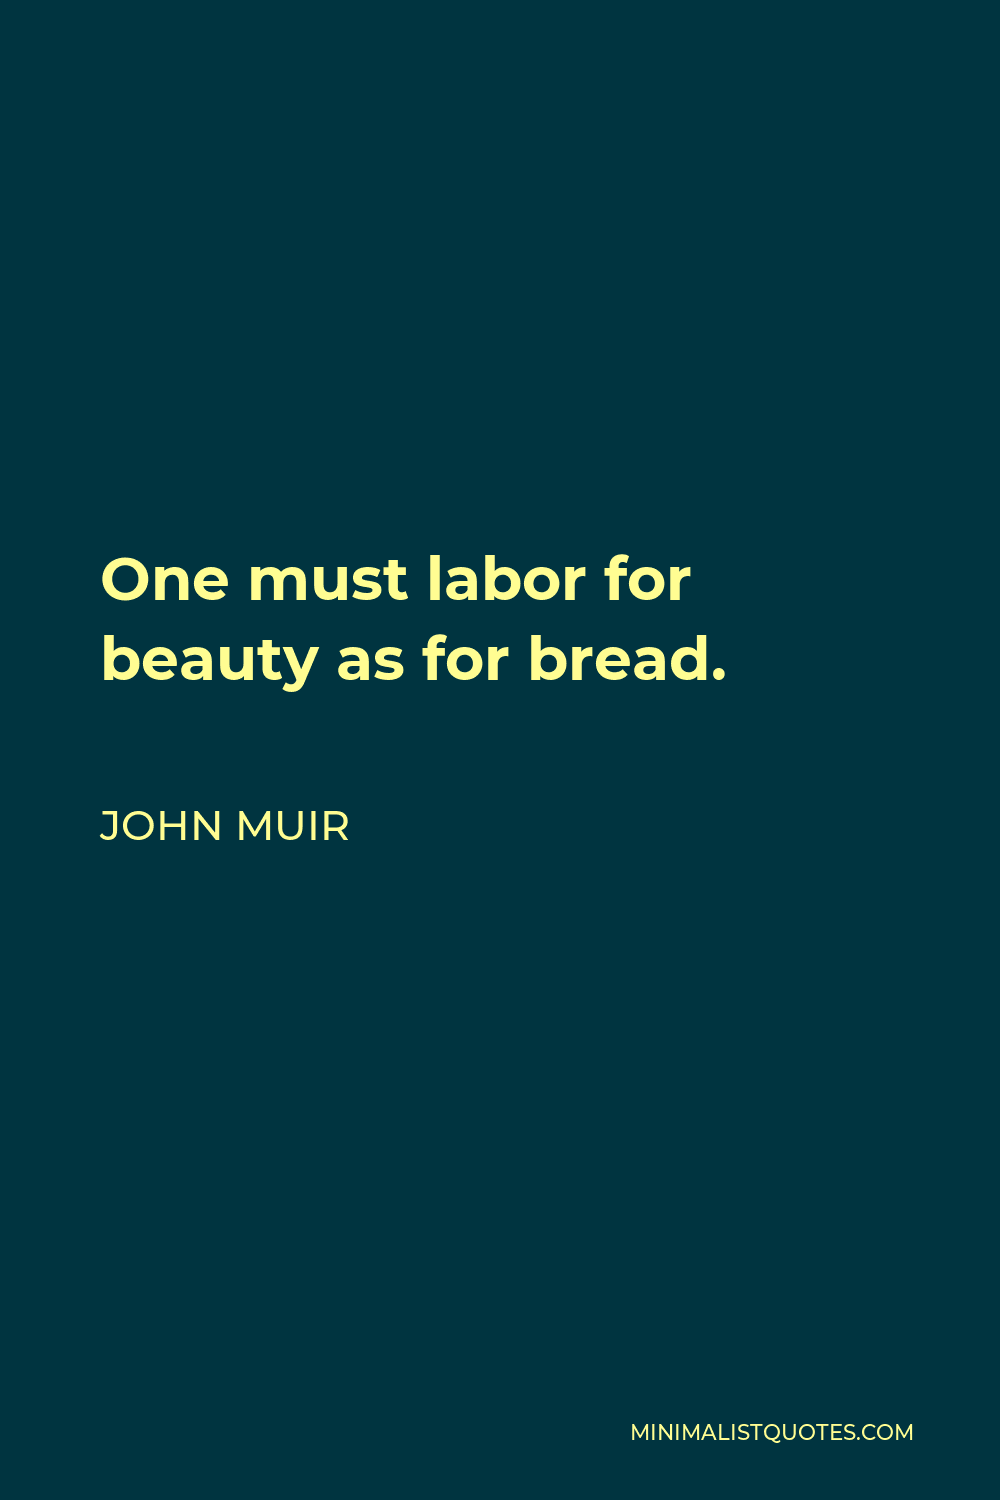 John Muir Quote - One must labor for beauty as for bread.